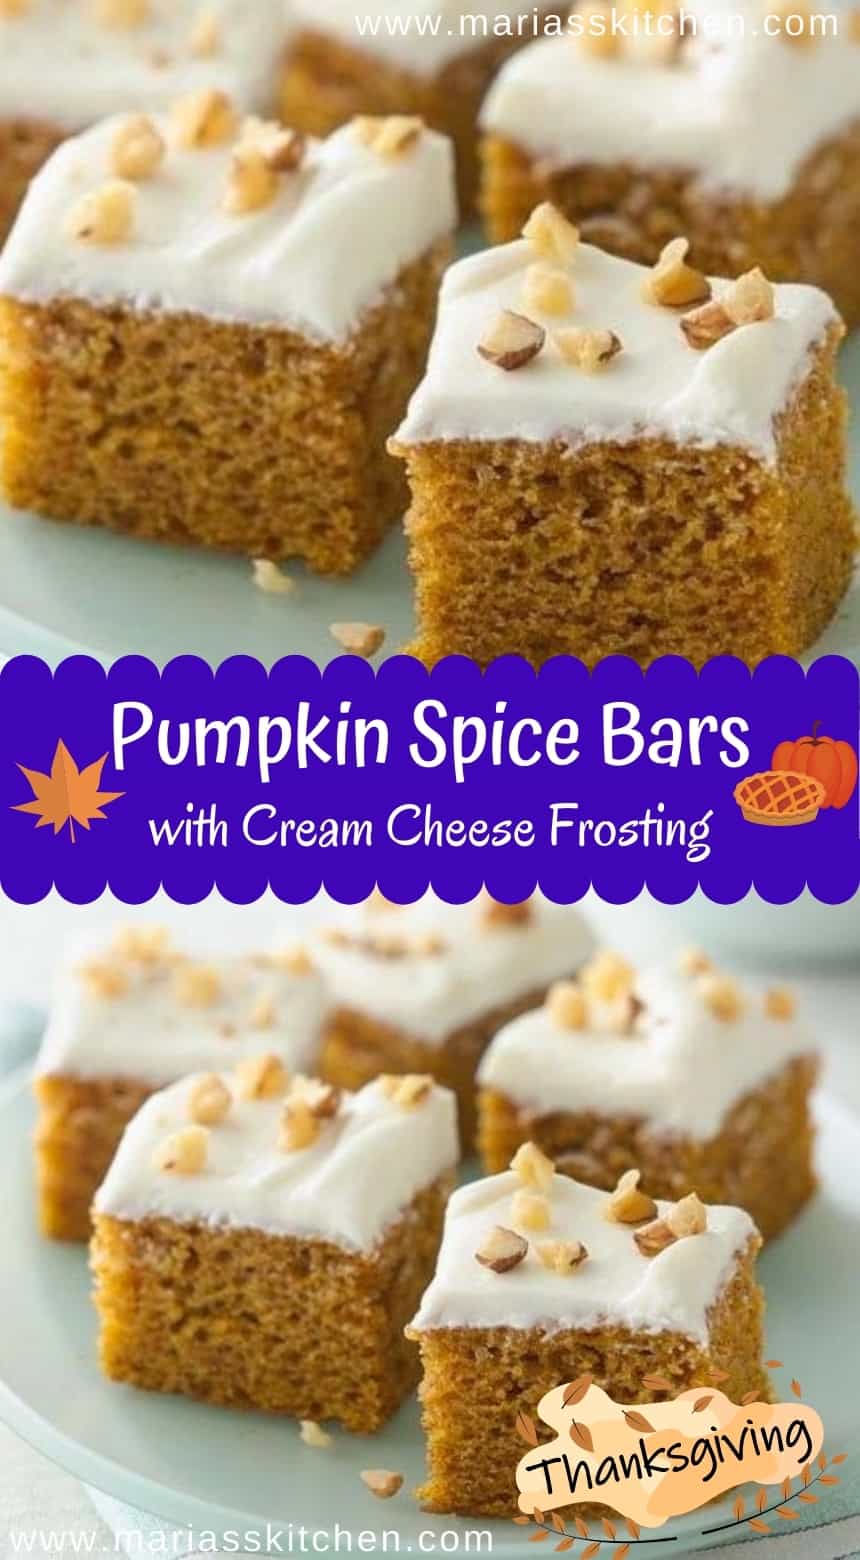 Pumpkin Spice Bars with Cream Cheese Frosting - Thanksgiving Desserts ...